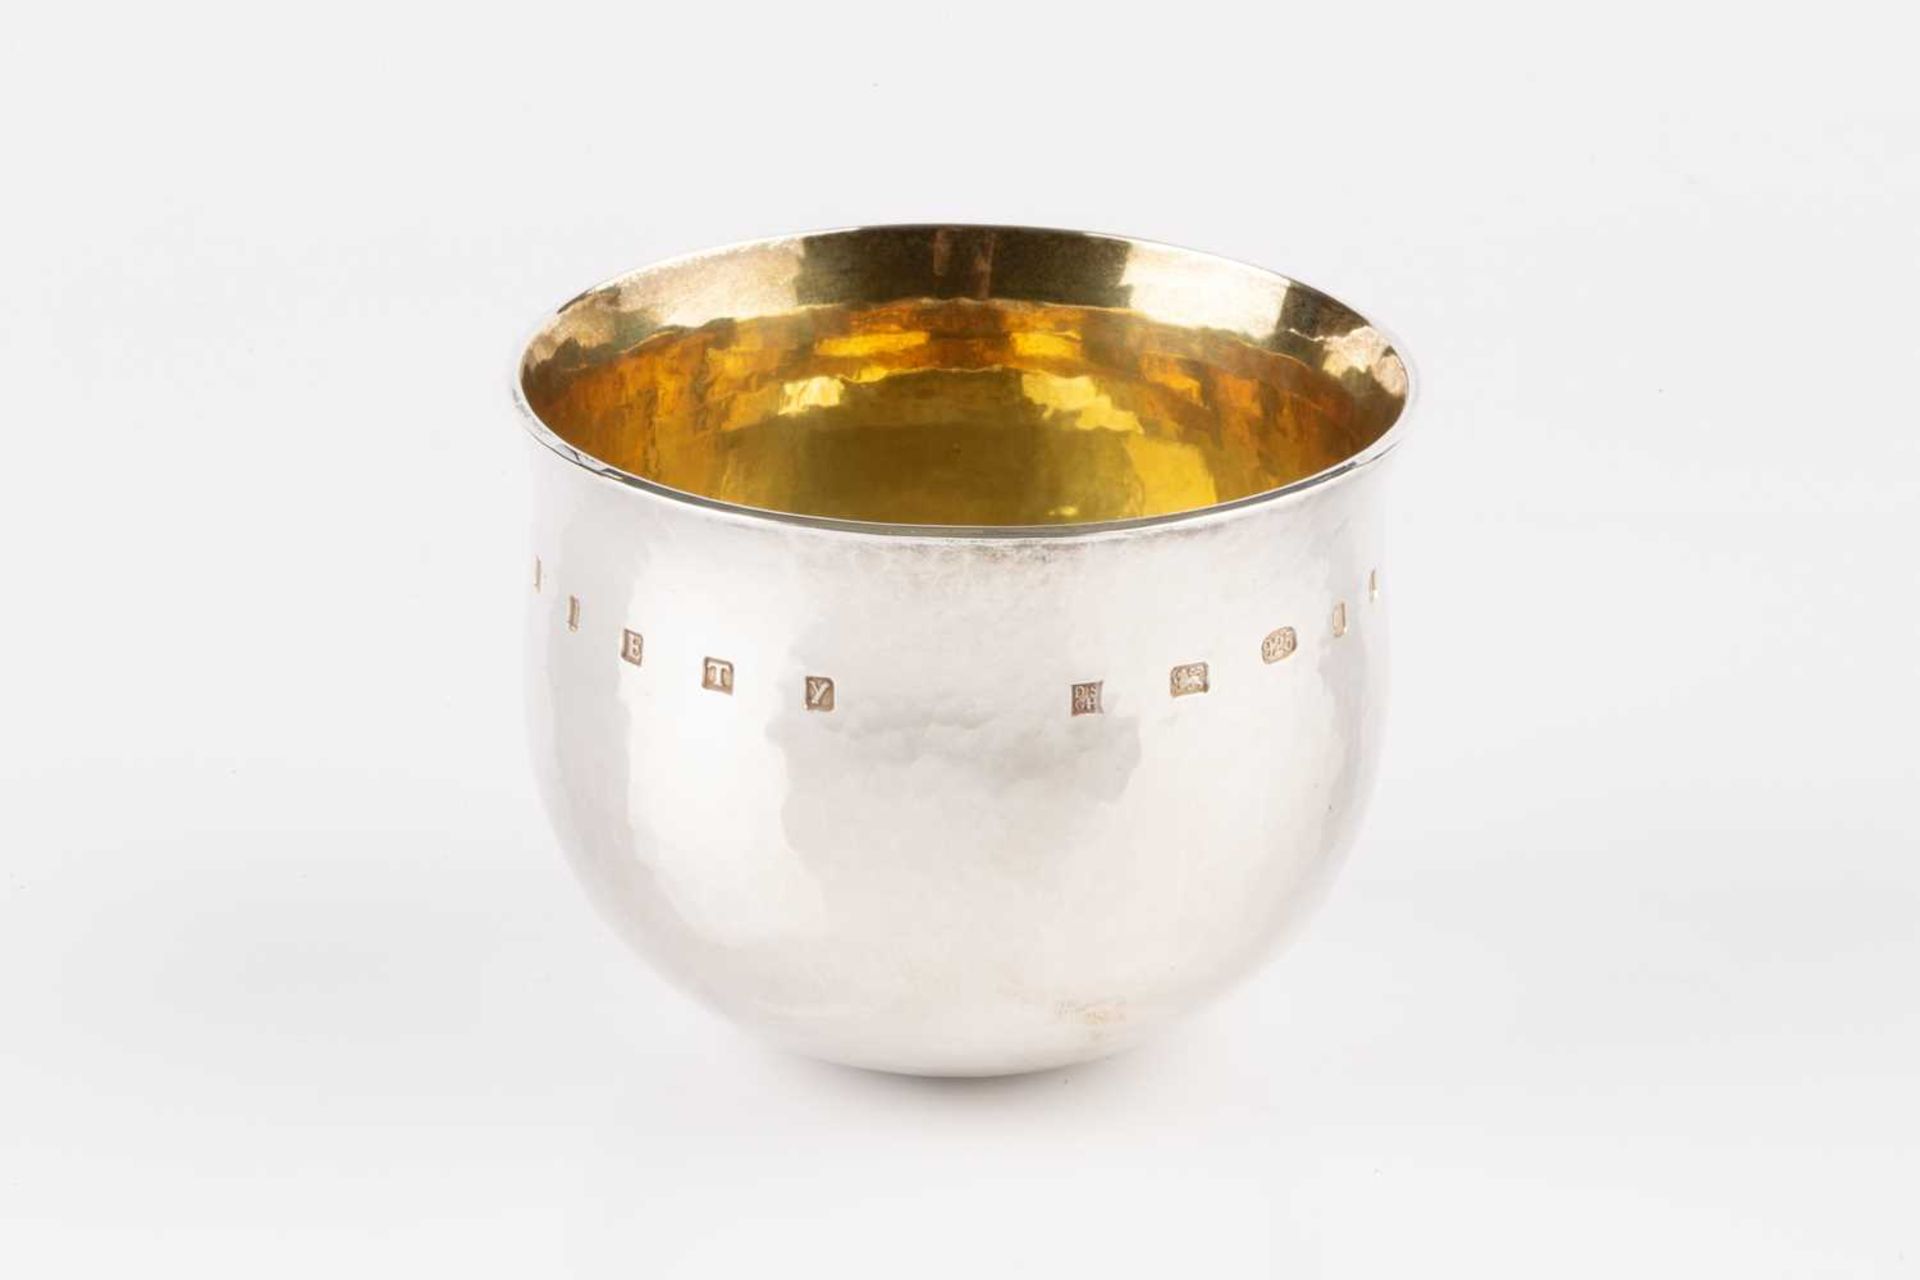 Dennis Smith and Gareth Harris for the Silver Society Commemorative bowl, 2008 silver, circular - Image 2 of 2